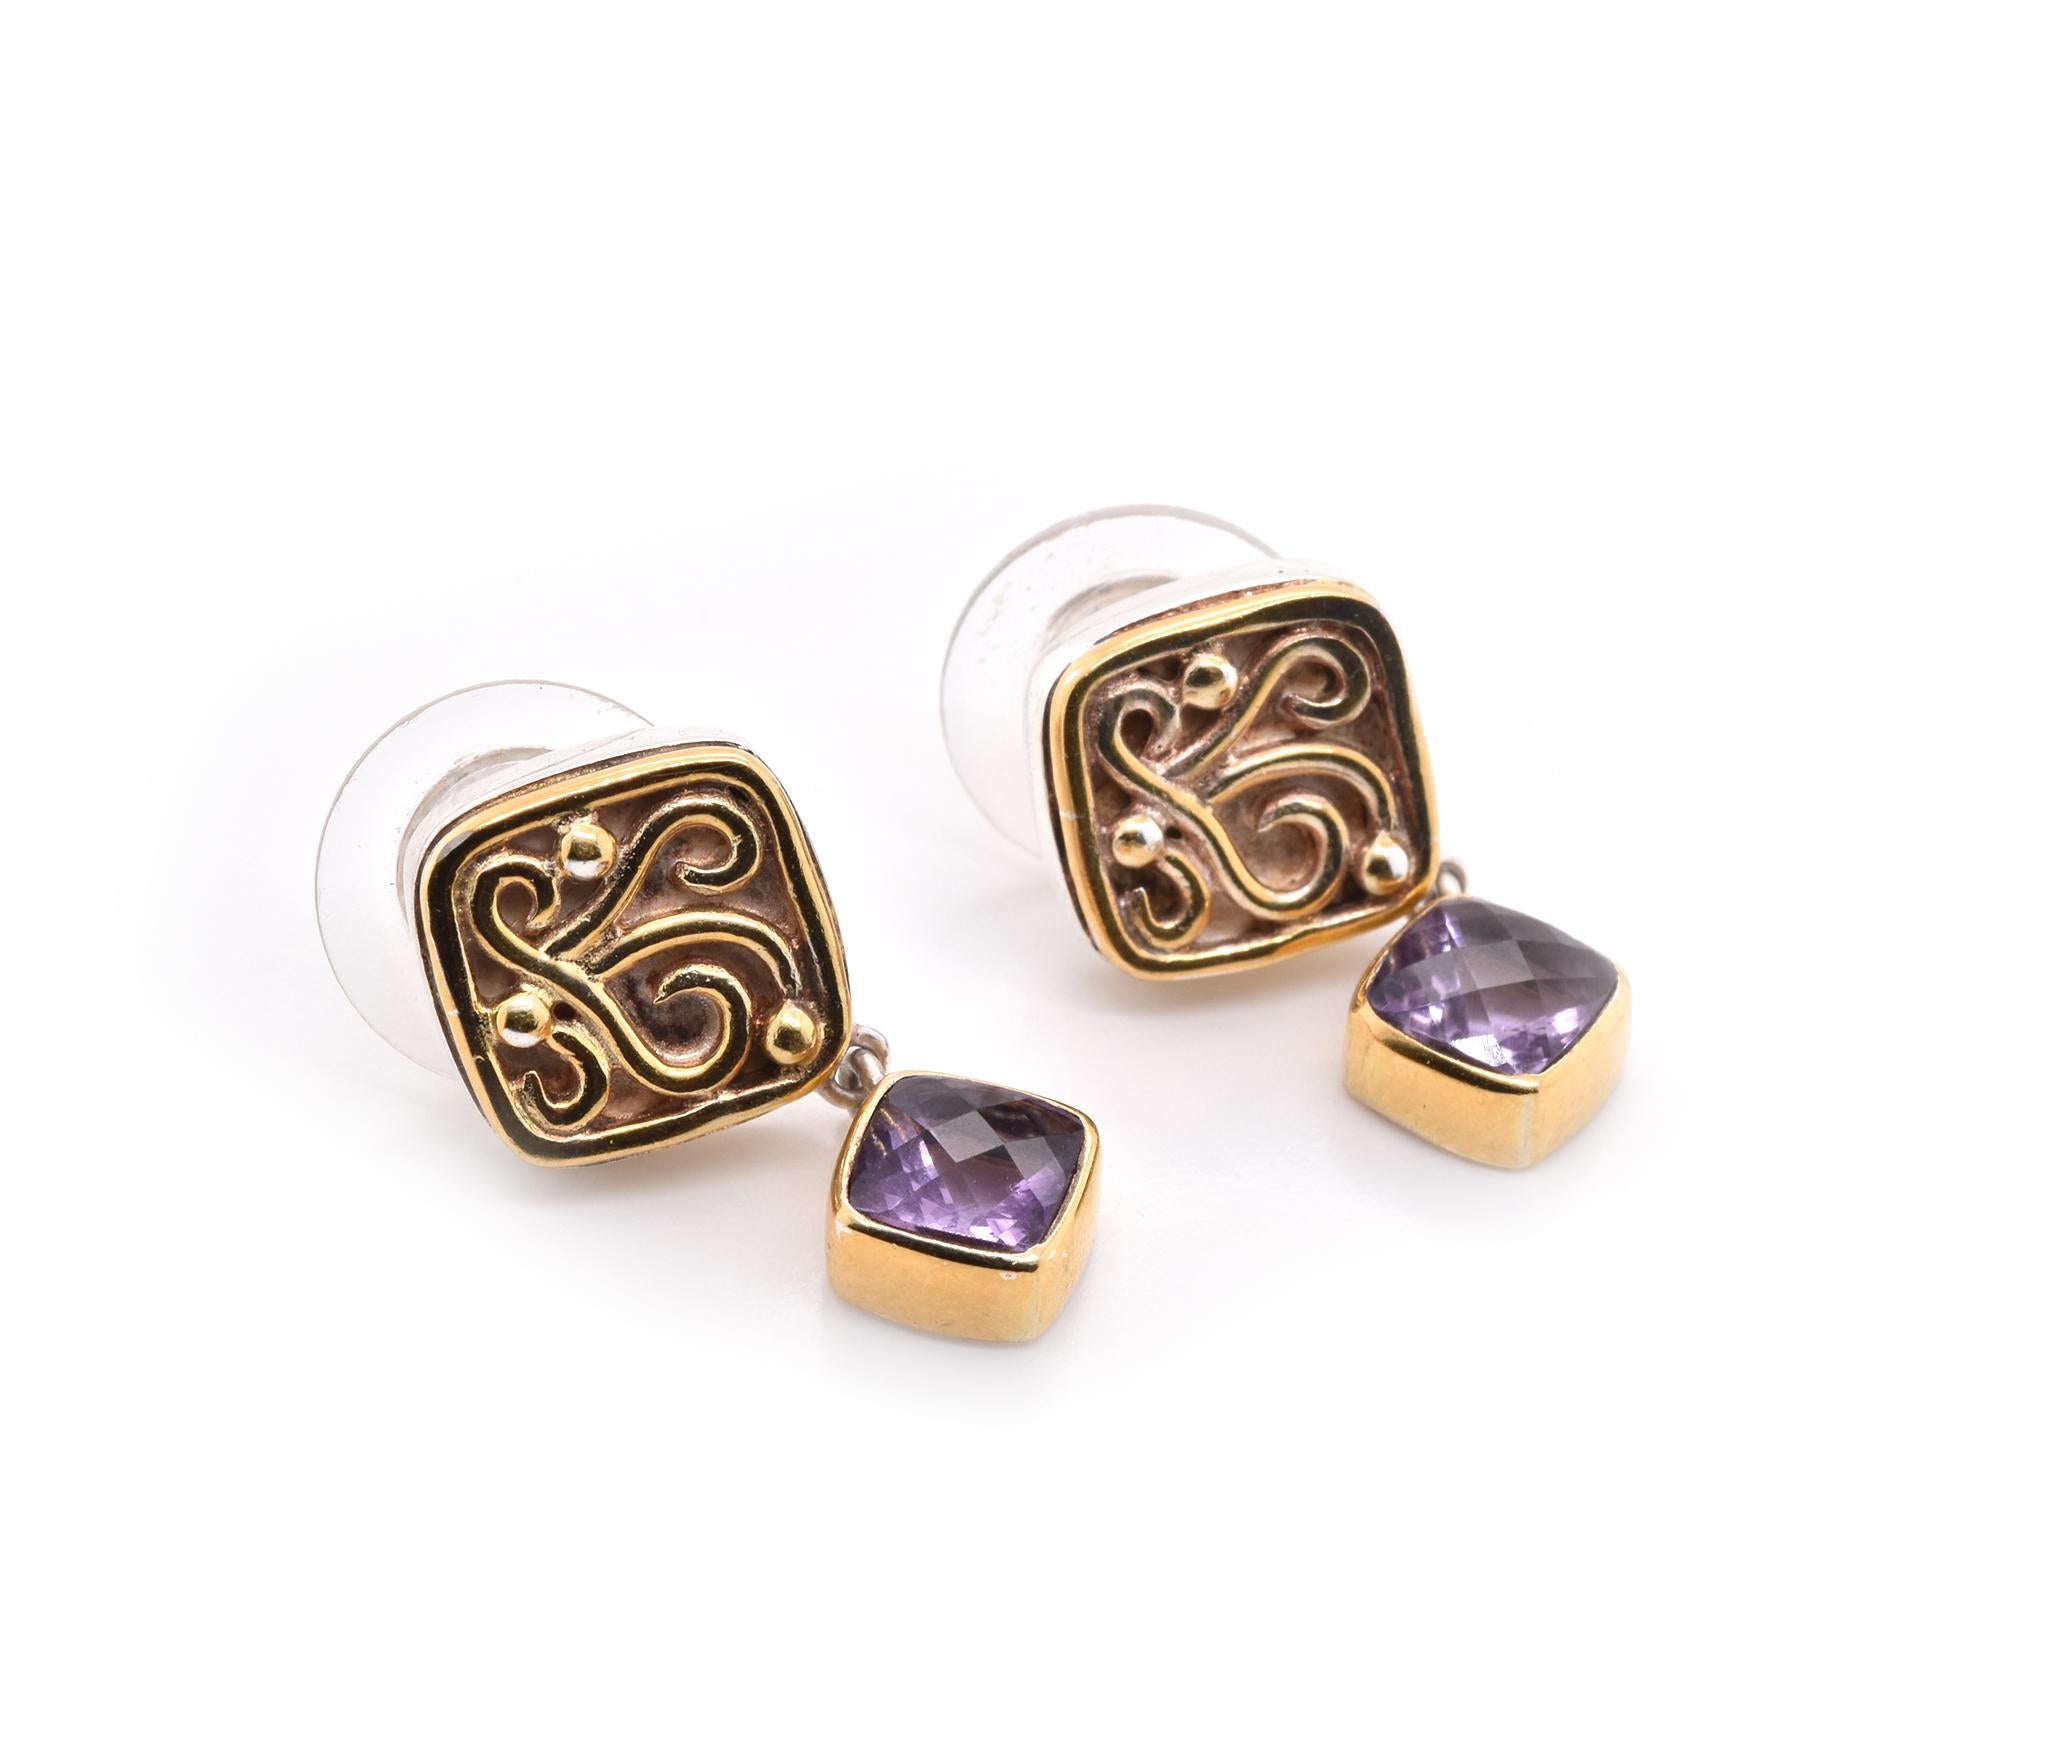 Material: Sterling Silver and 18k yellow gold
Amethyst: 9 checkerboard cushion cuts
Dimensions: bracelet is approximately 7.5-inches long, earrings measure 24.60mm x 13mm
Weight: 26.5 grams
